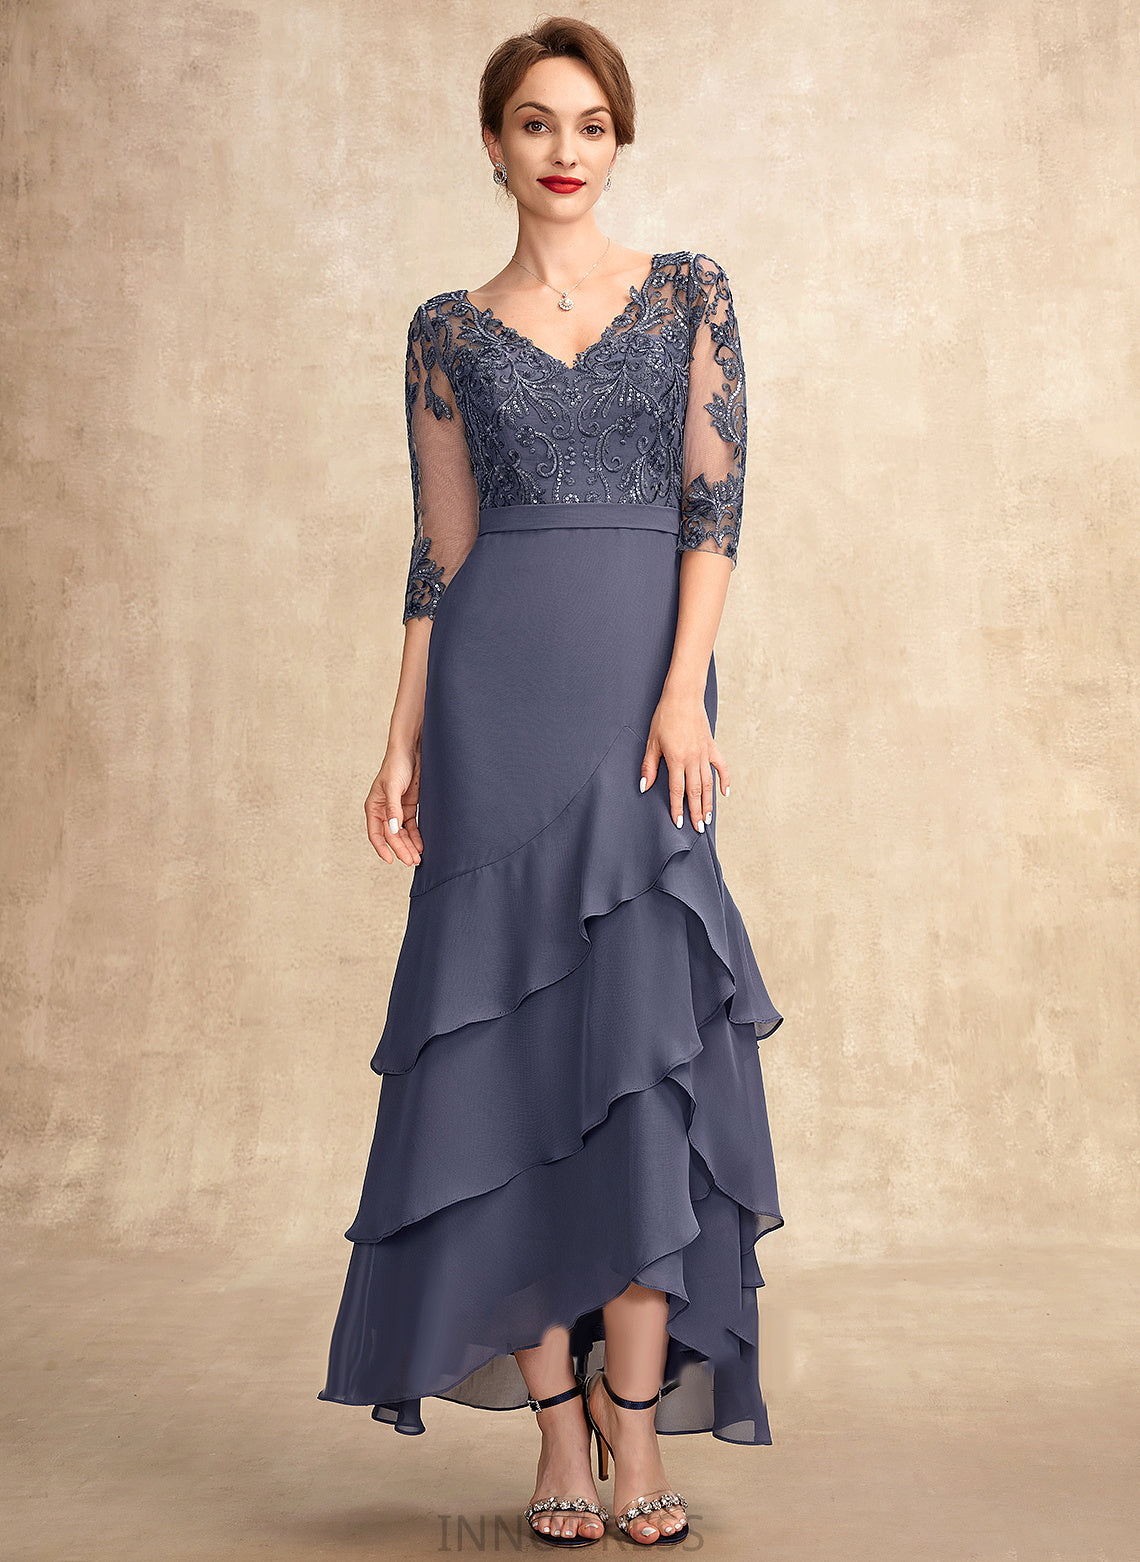 Dress Ruffles Cascading Mother of the Bride Dresses Sequins With Asymmetrical Bride Chiffon of Trumpet/Mermaid Anika the Mother Lace V-neck